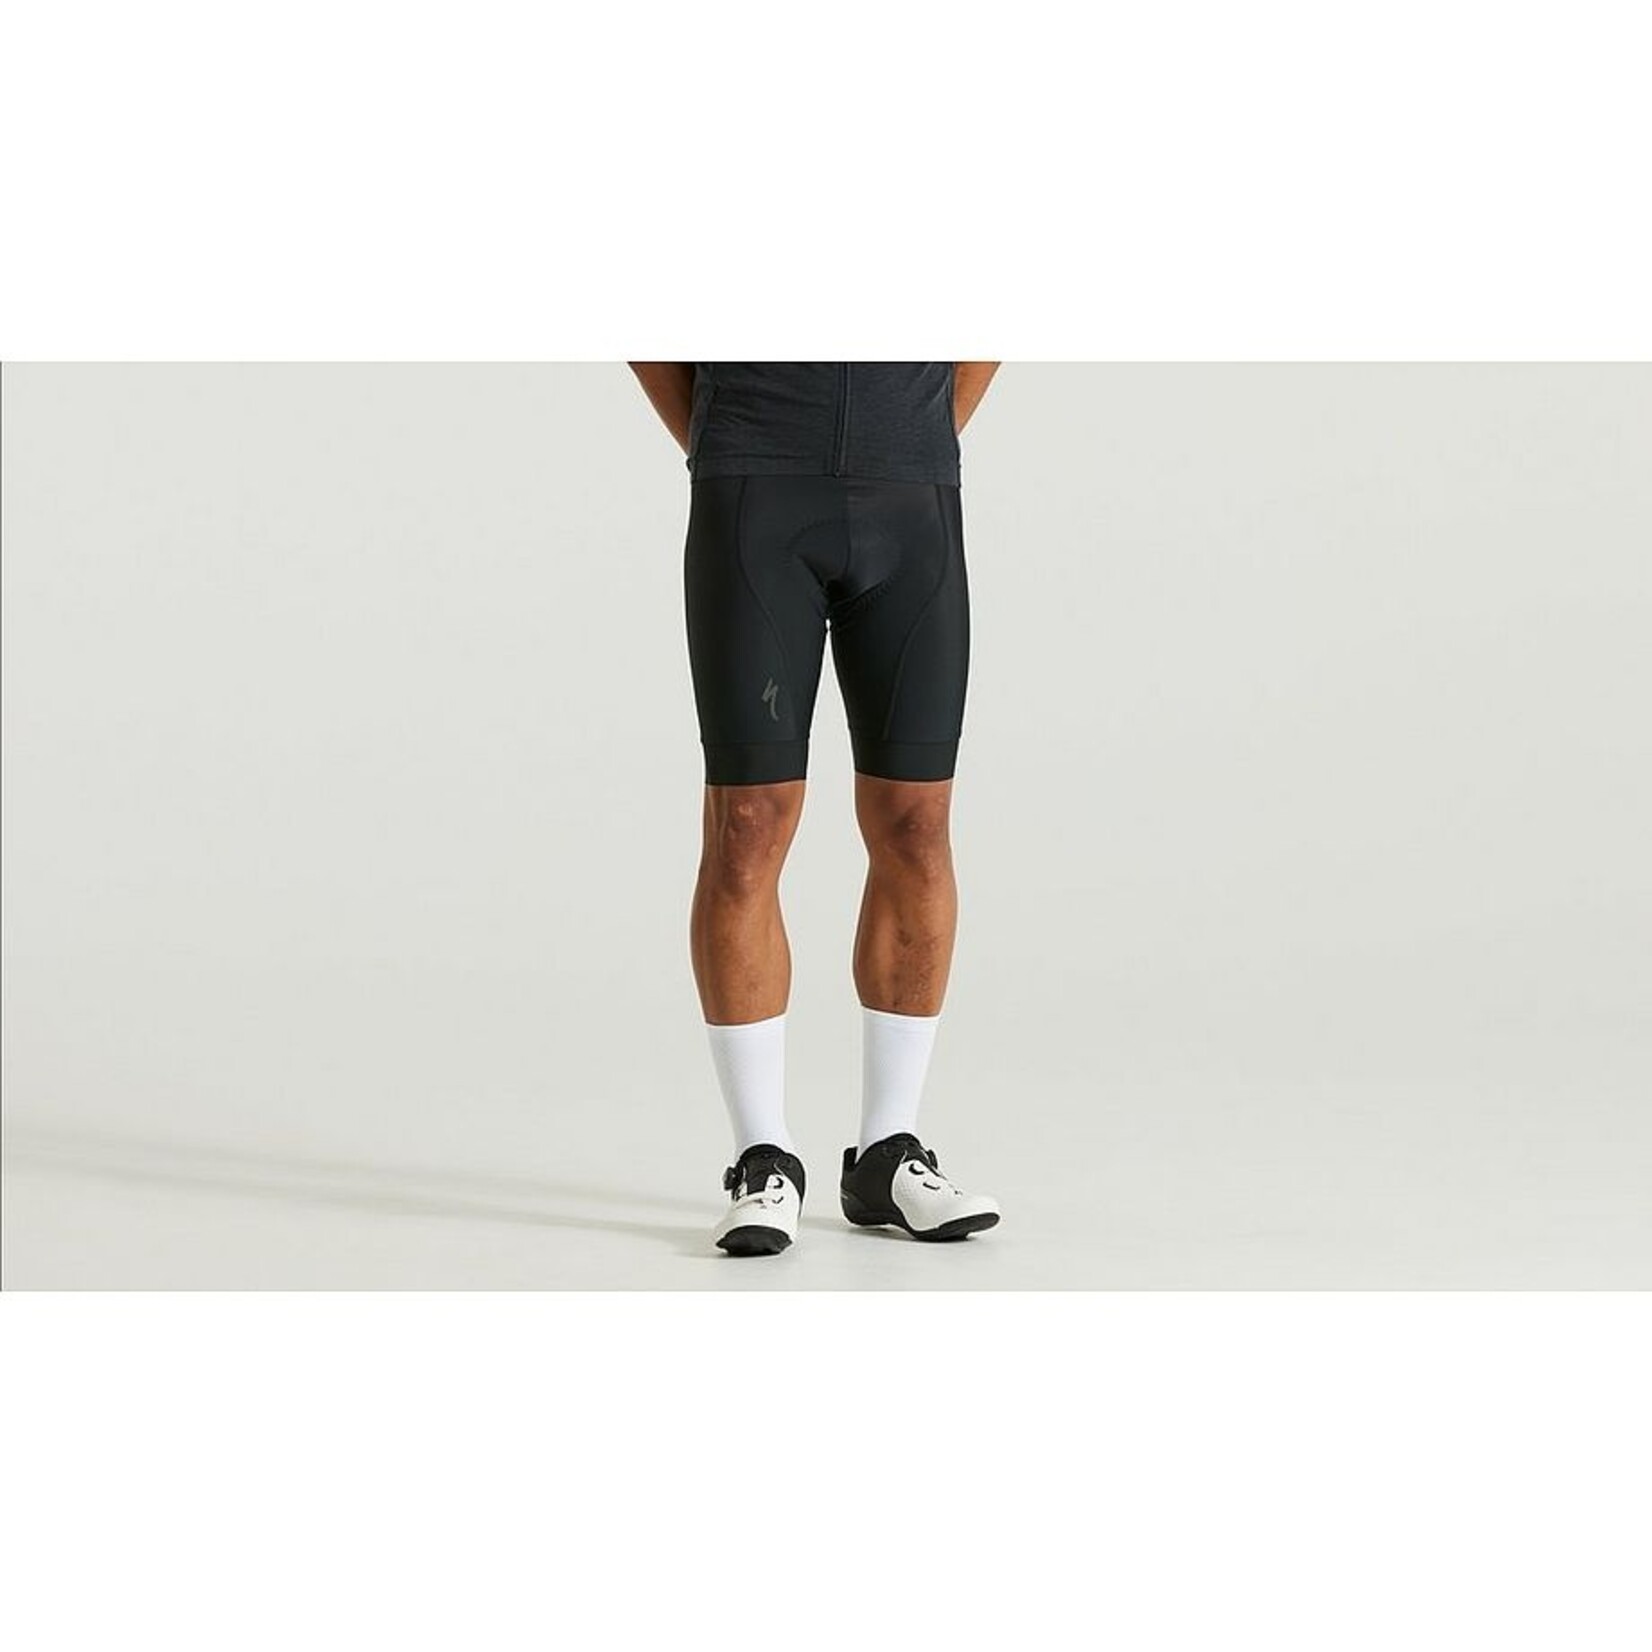 Specialized Mens RBX Shorts in Black